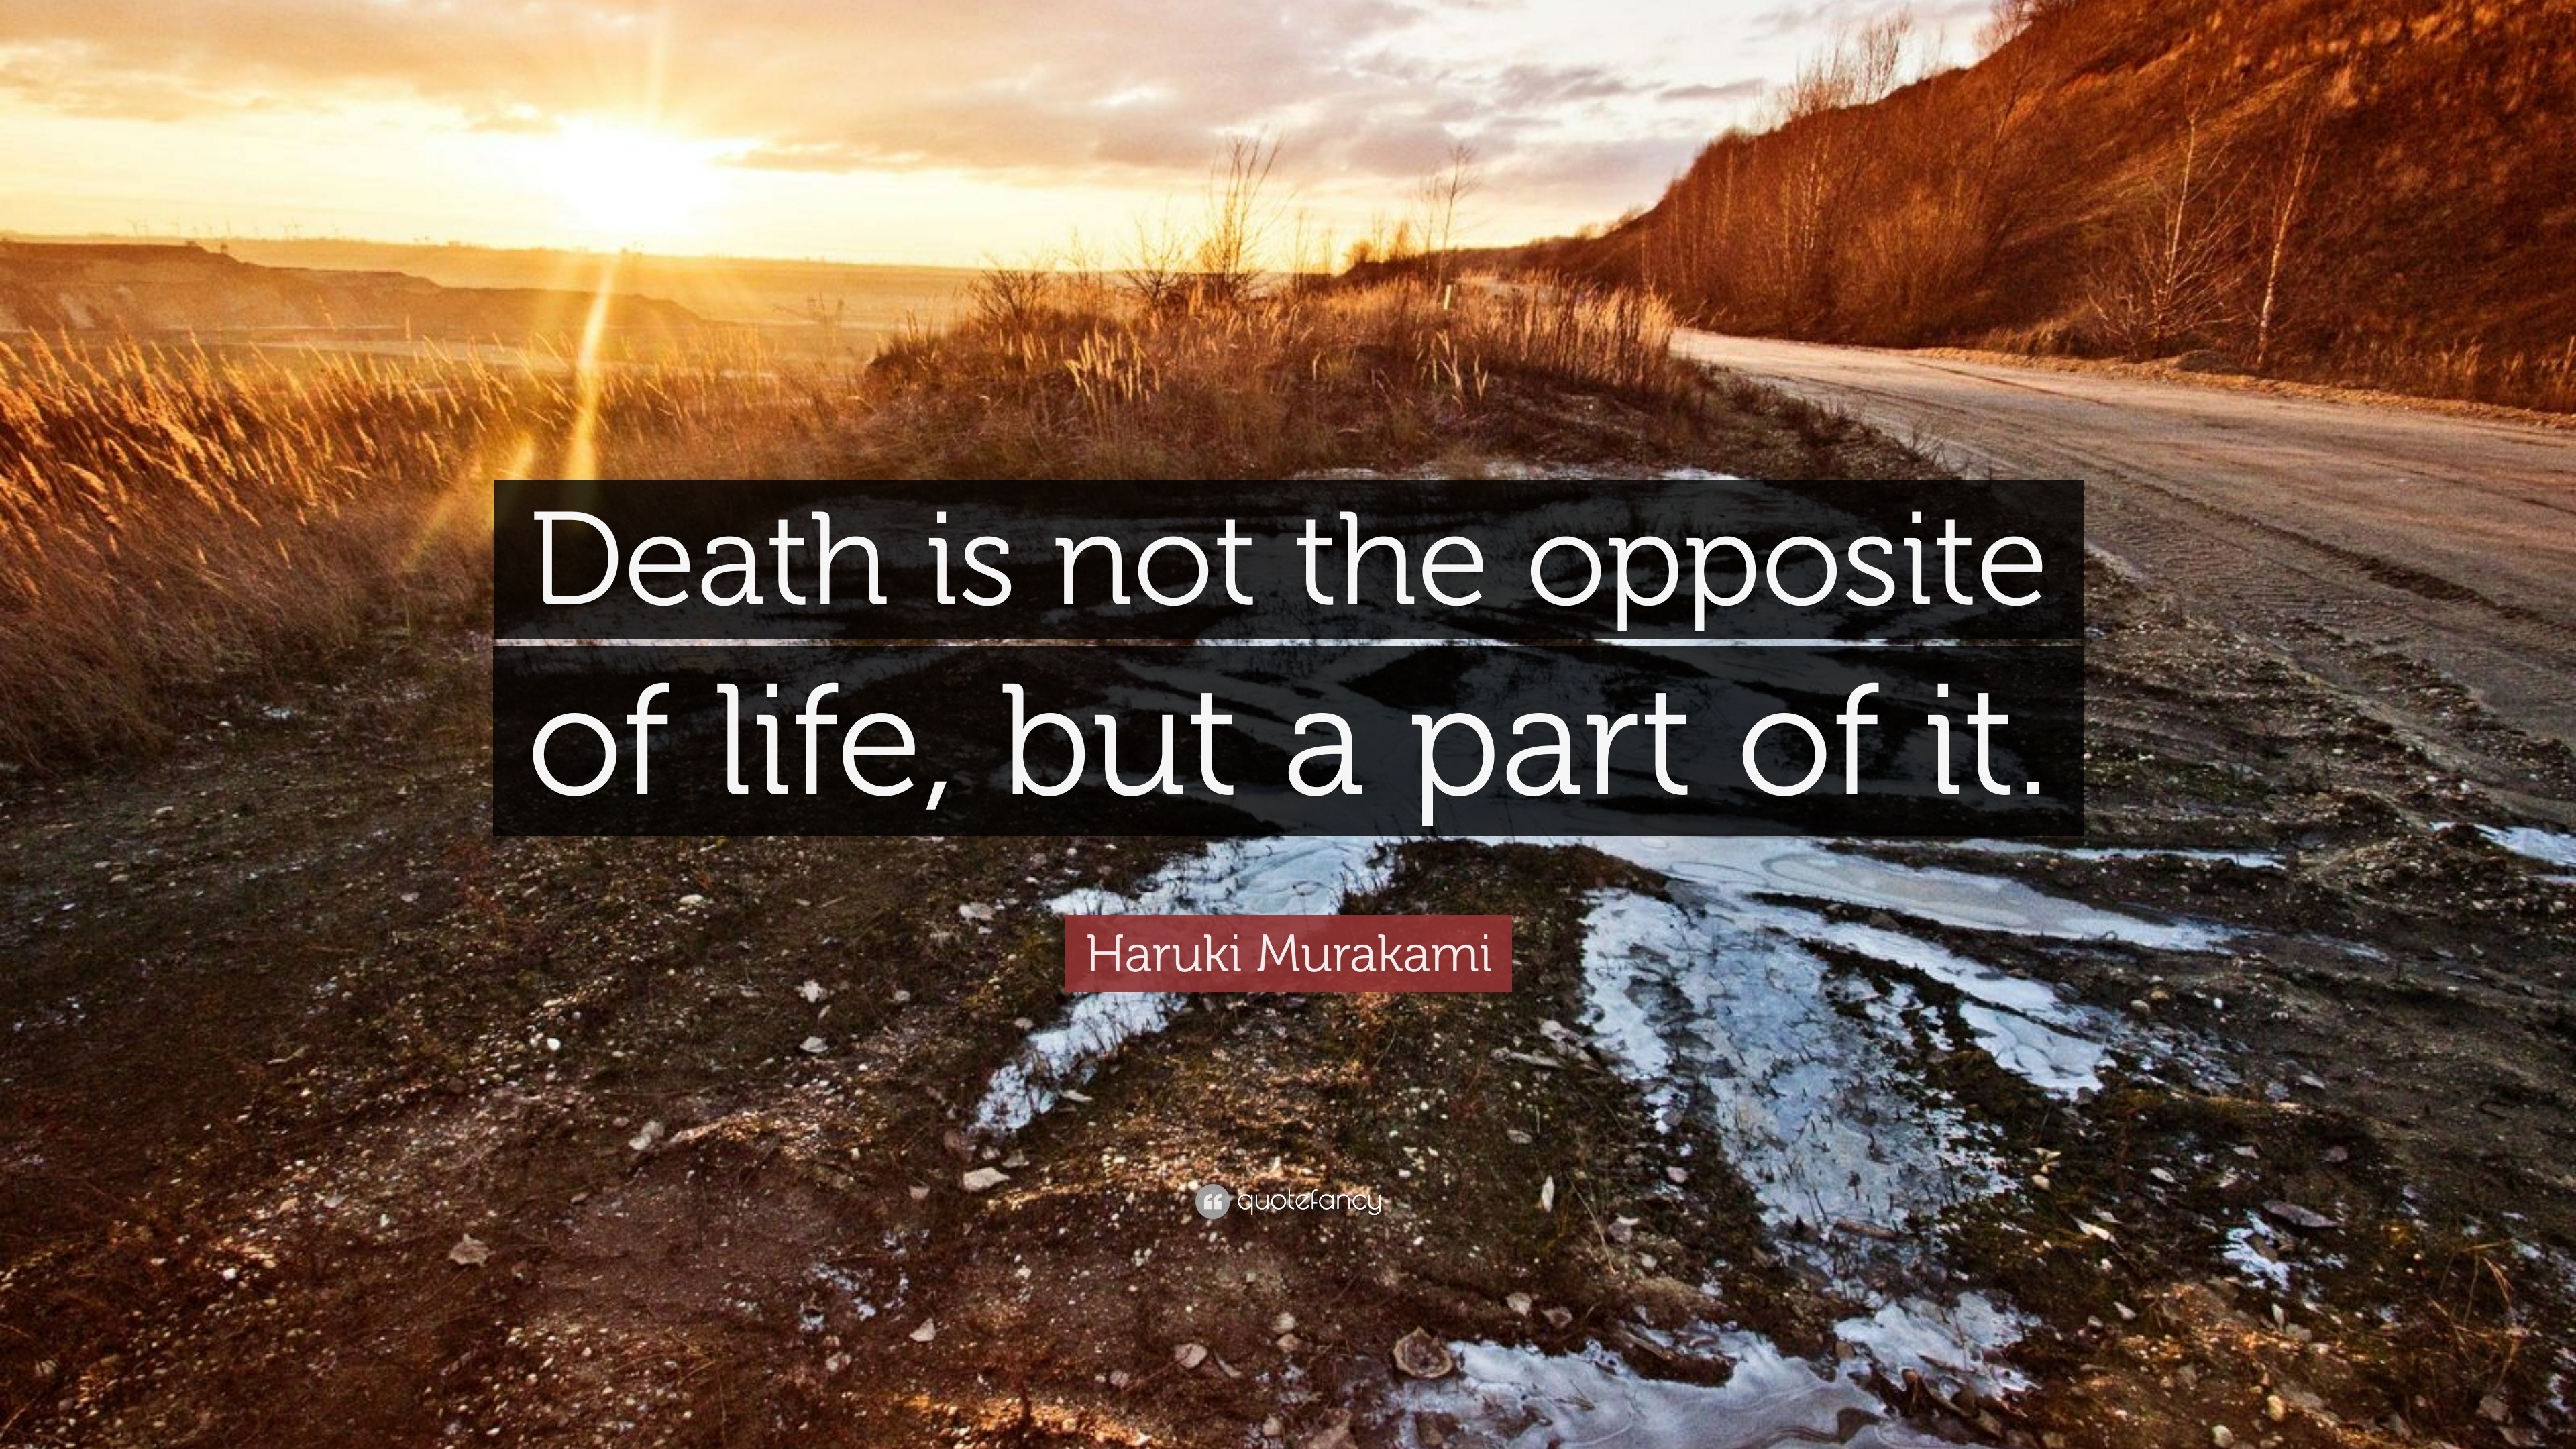 Haruki Murakami Quote: “Death is not the opposite of life, but a part